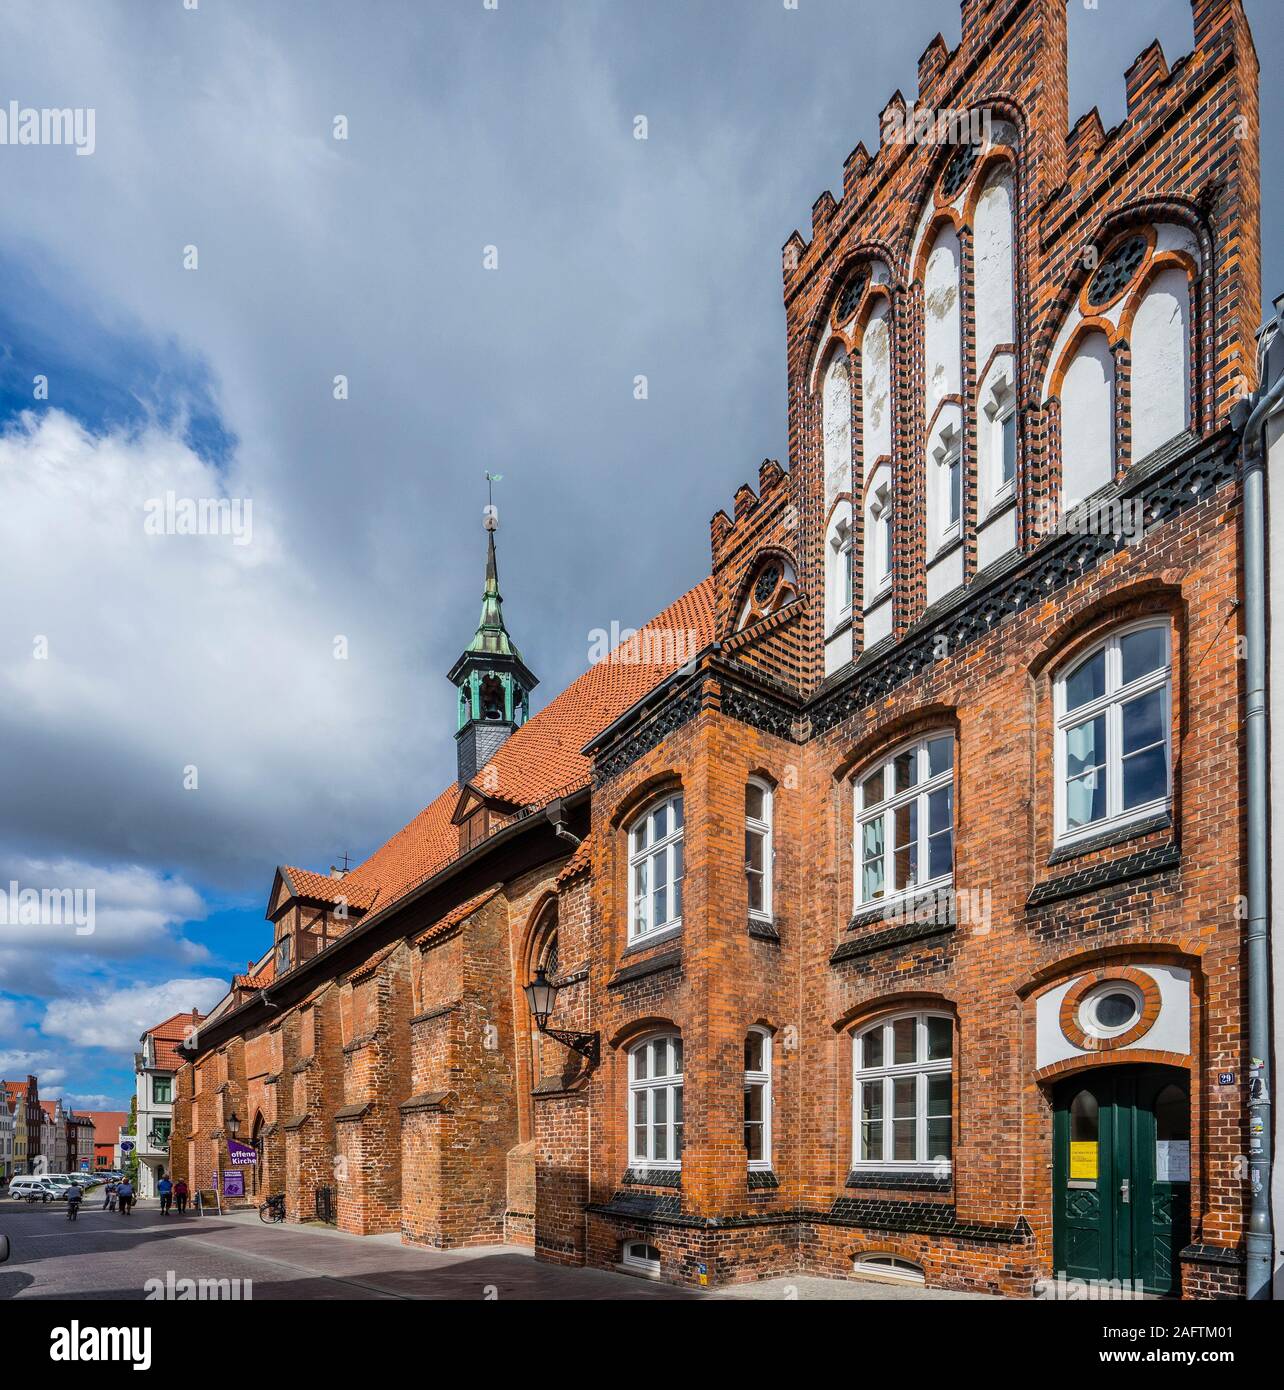 the 13th century red brick architecture of the Holy Spirit Church and hospital in the Hanseatic City of Wismar, Mecklenburg-Vorpommern, Germany Stock Photo